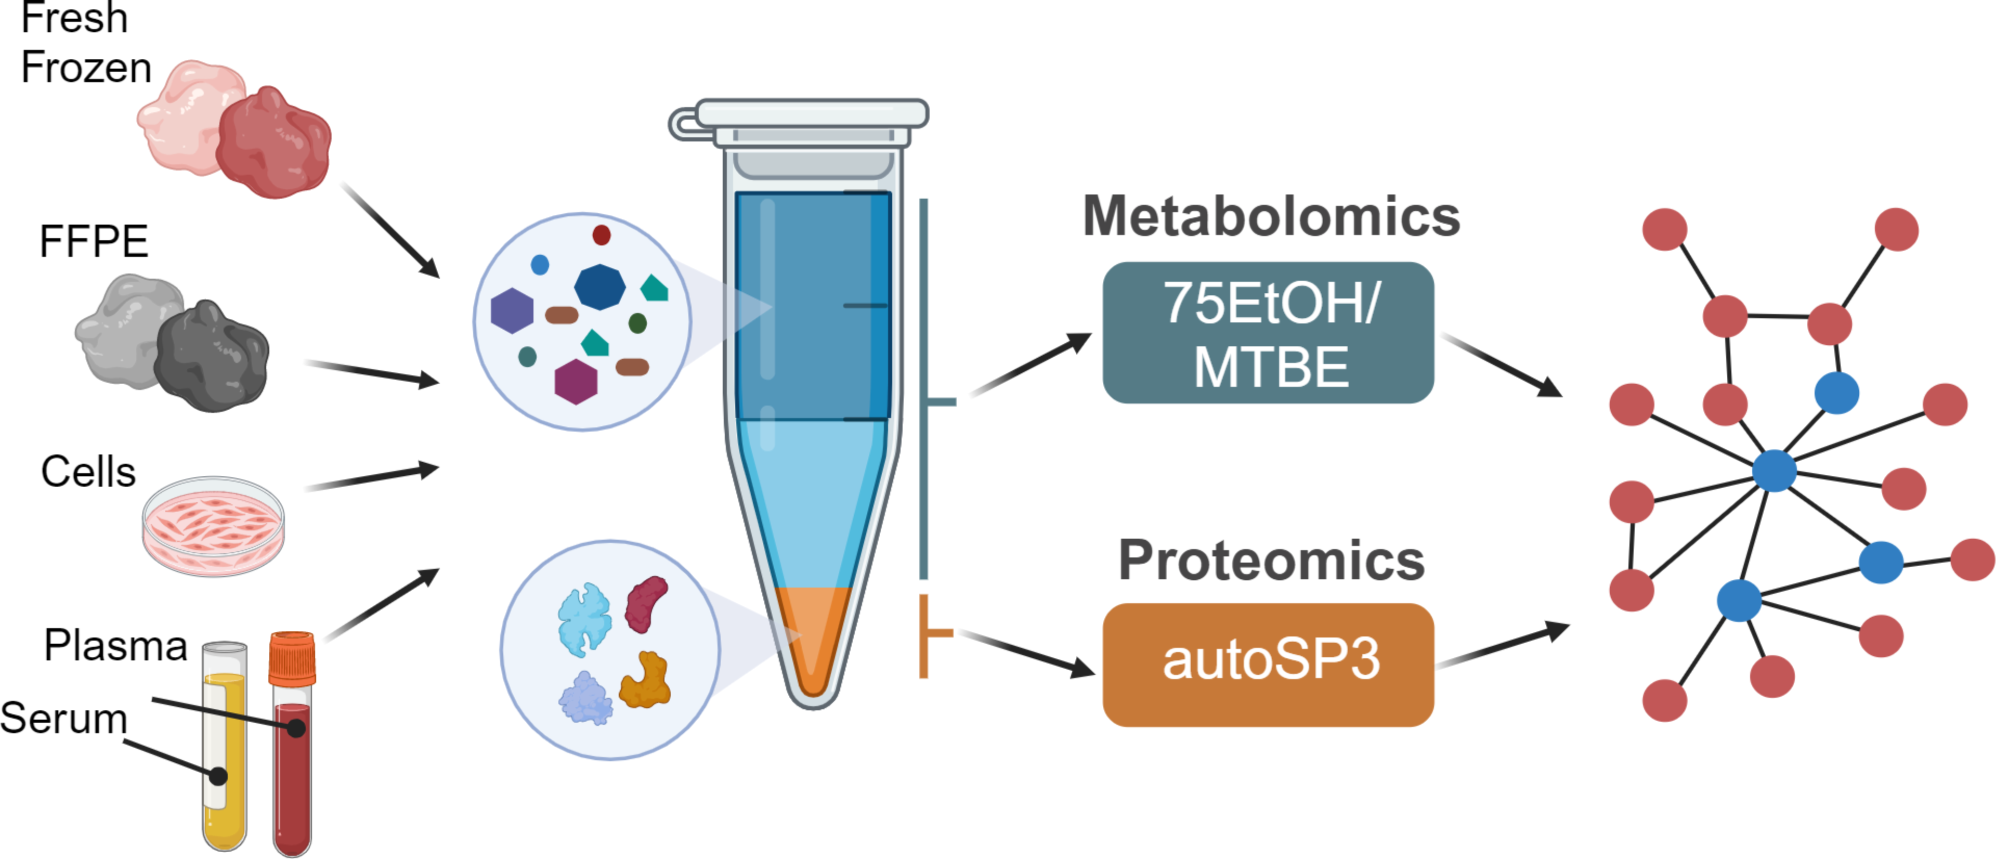 A single-sample workflow for joint metabolomic and proteomic analysis of clinical specimens